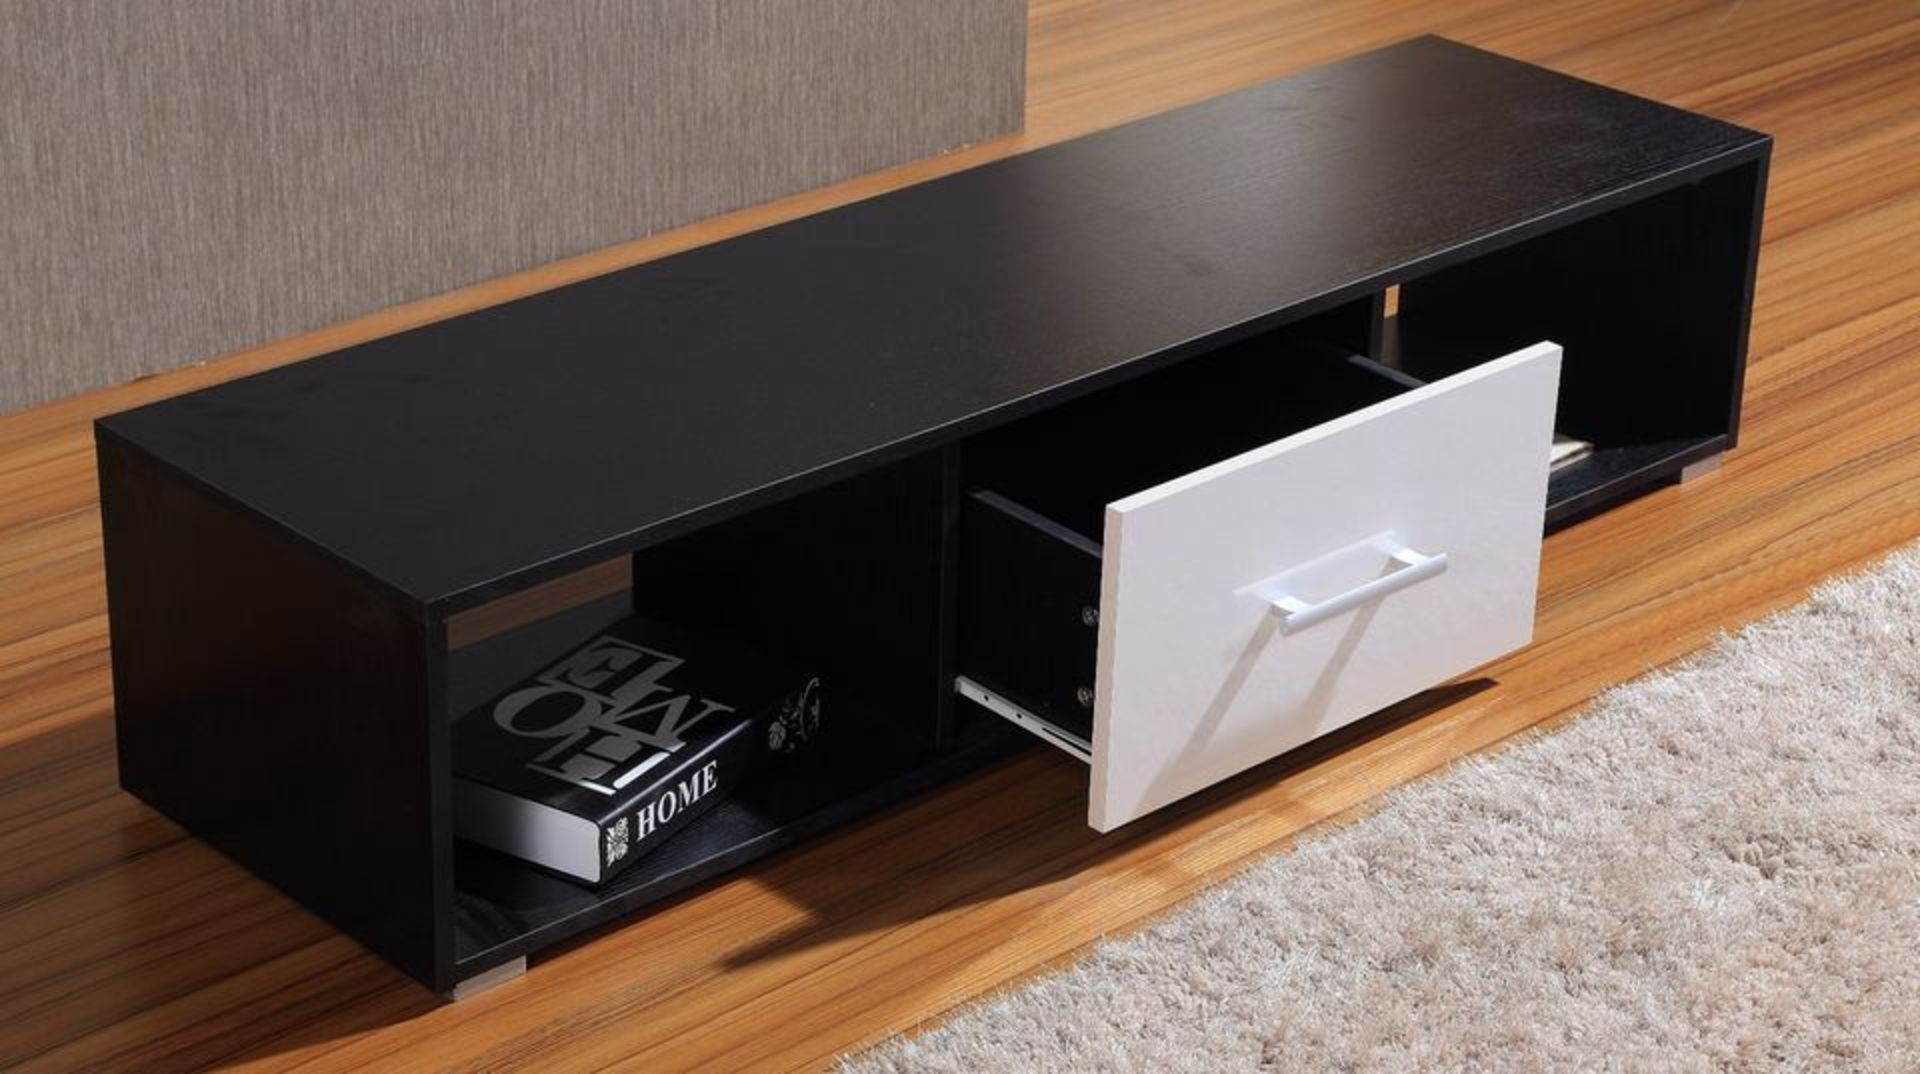 WHITE ON BLACK TV STAND BRAND NEW BOXED (TV11) - Image 2 of 2